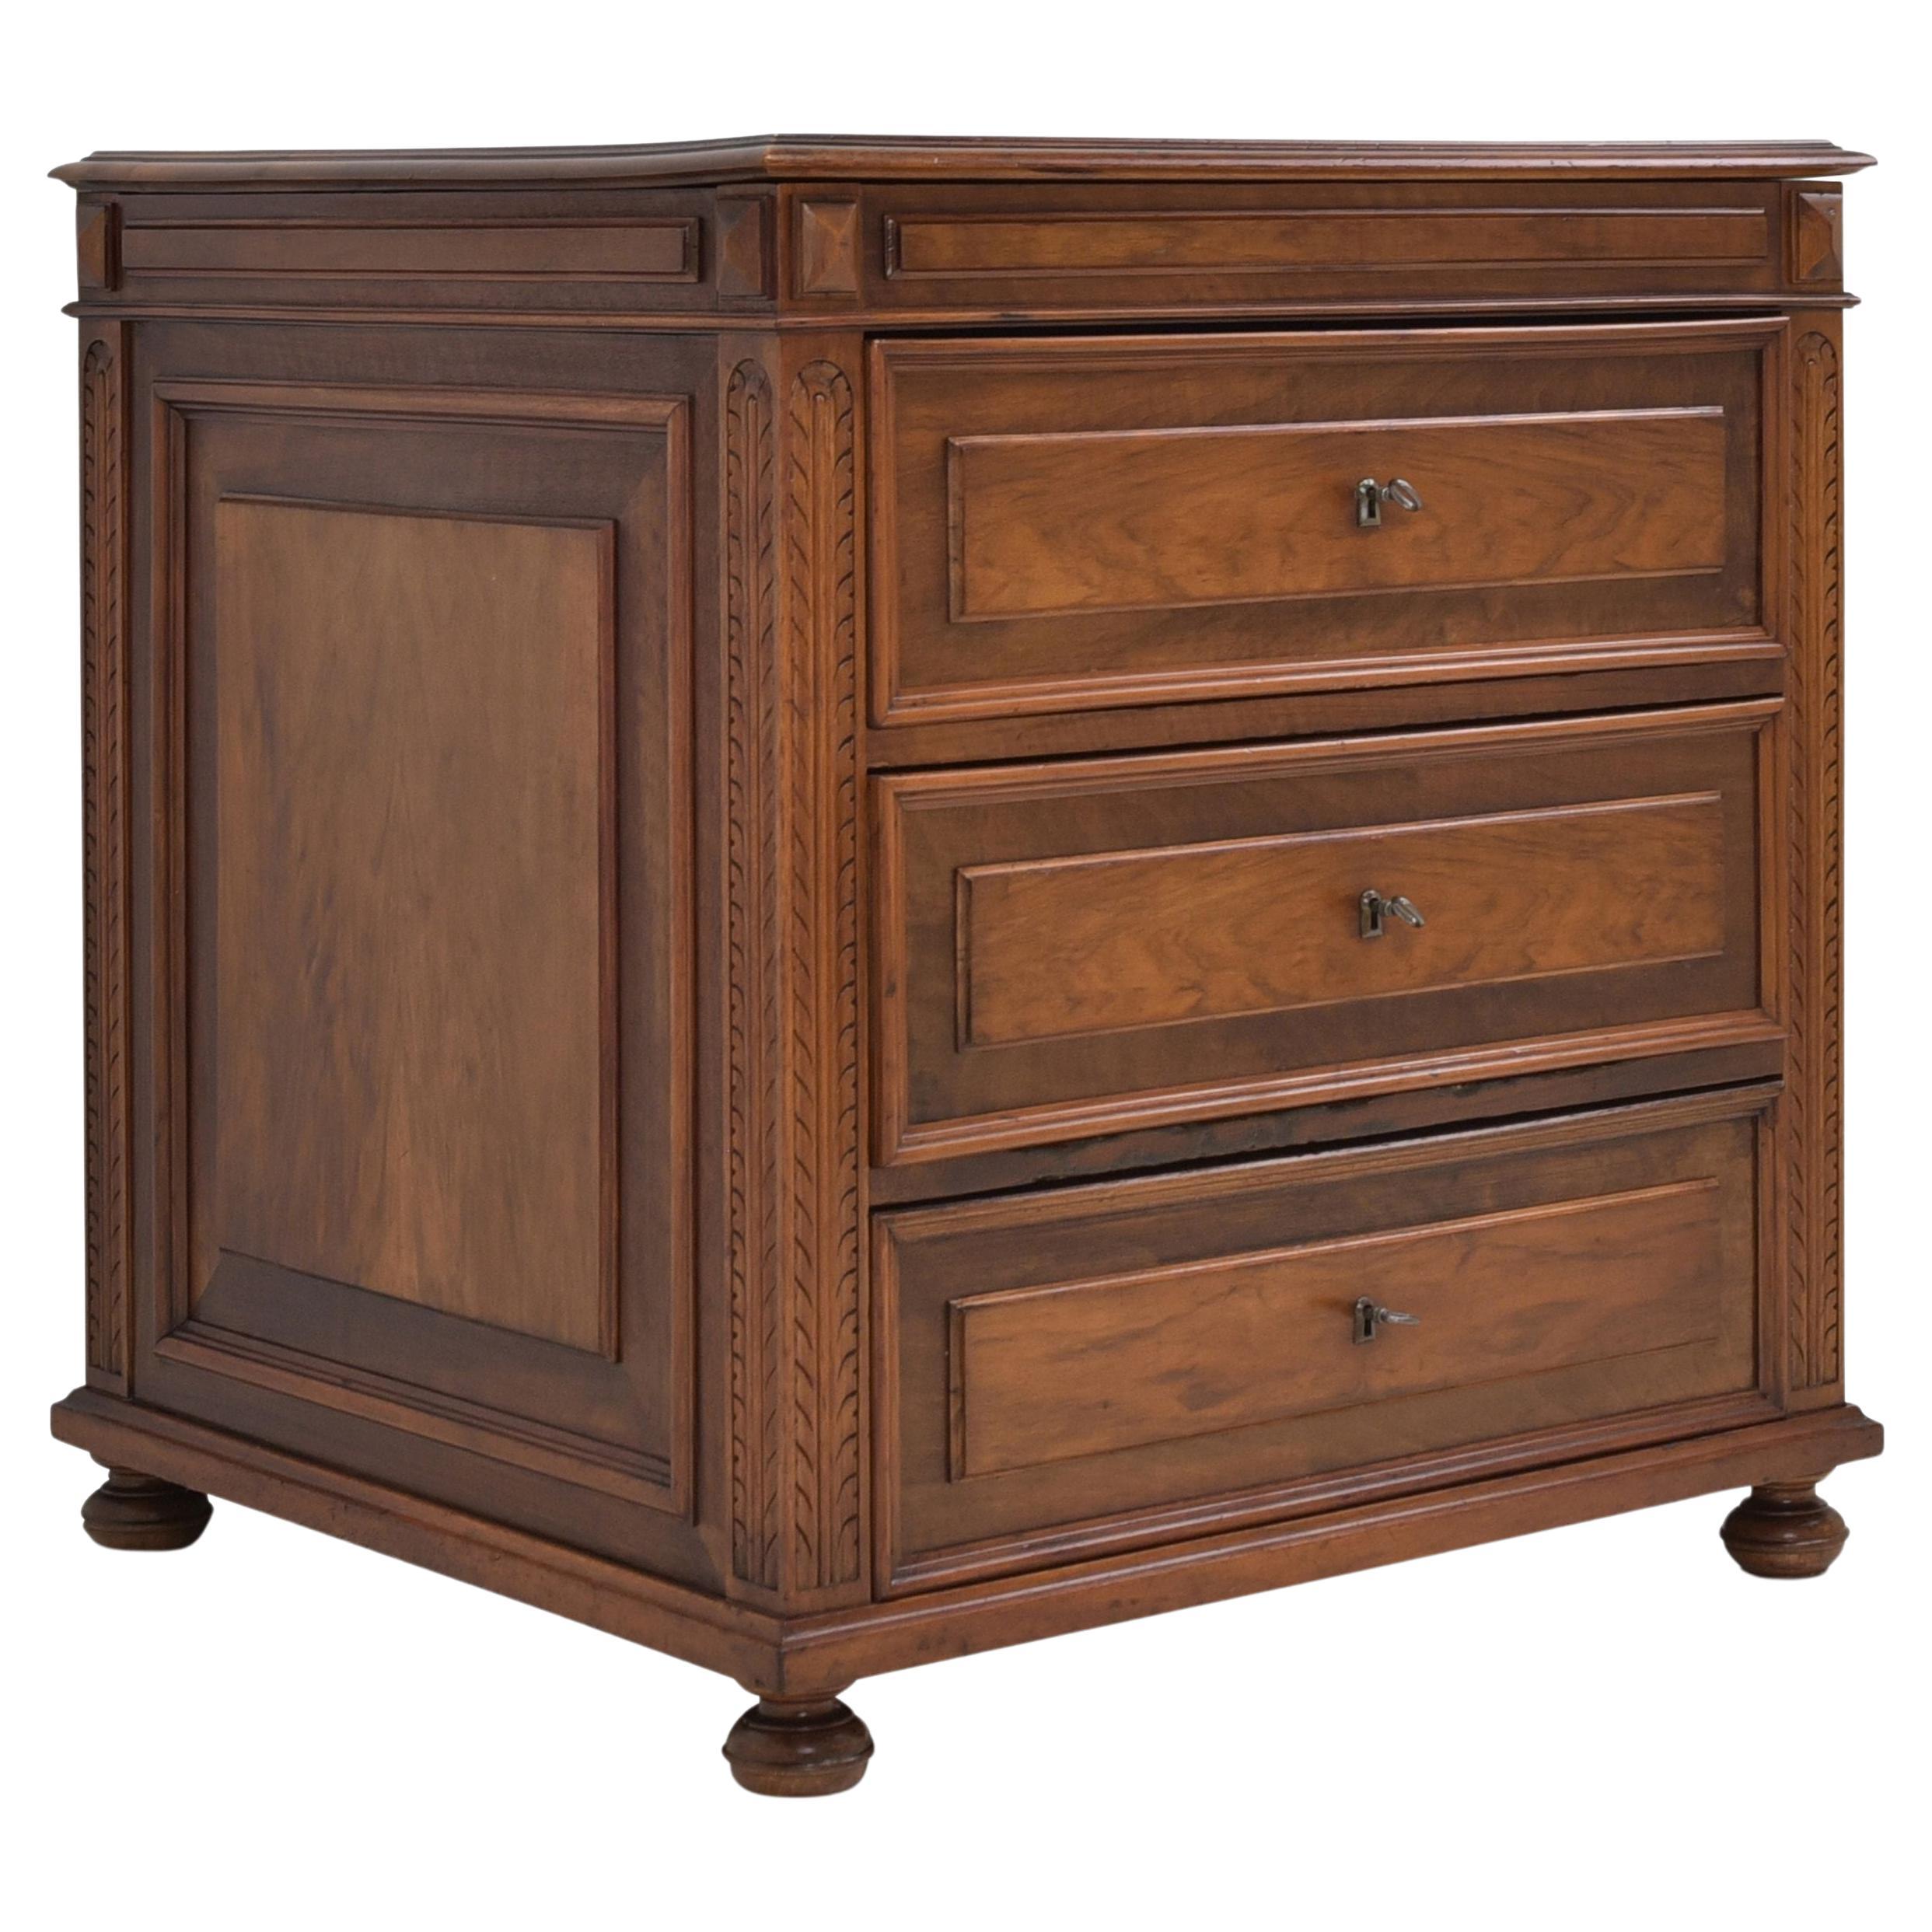 Gründerzeit Small Deep Chest of Drawers in Solid Walnut, 1900 For Sale